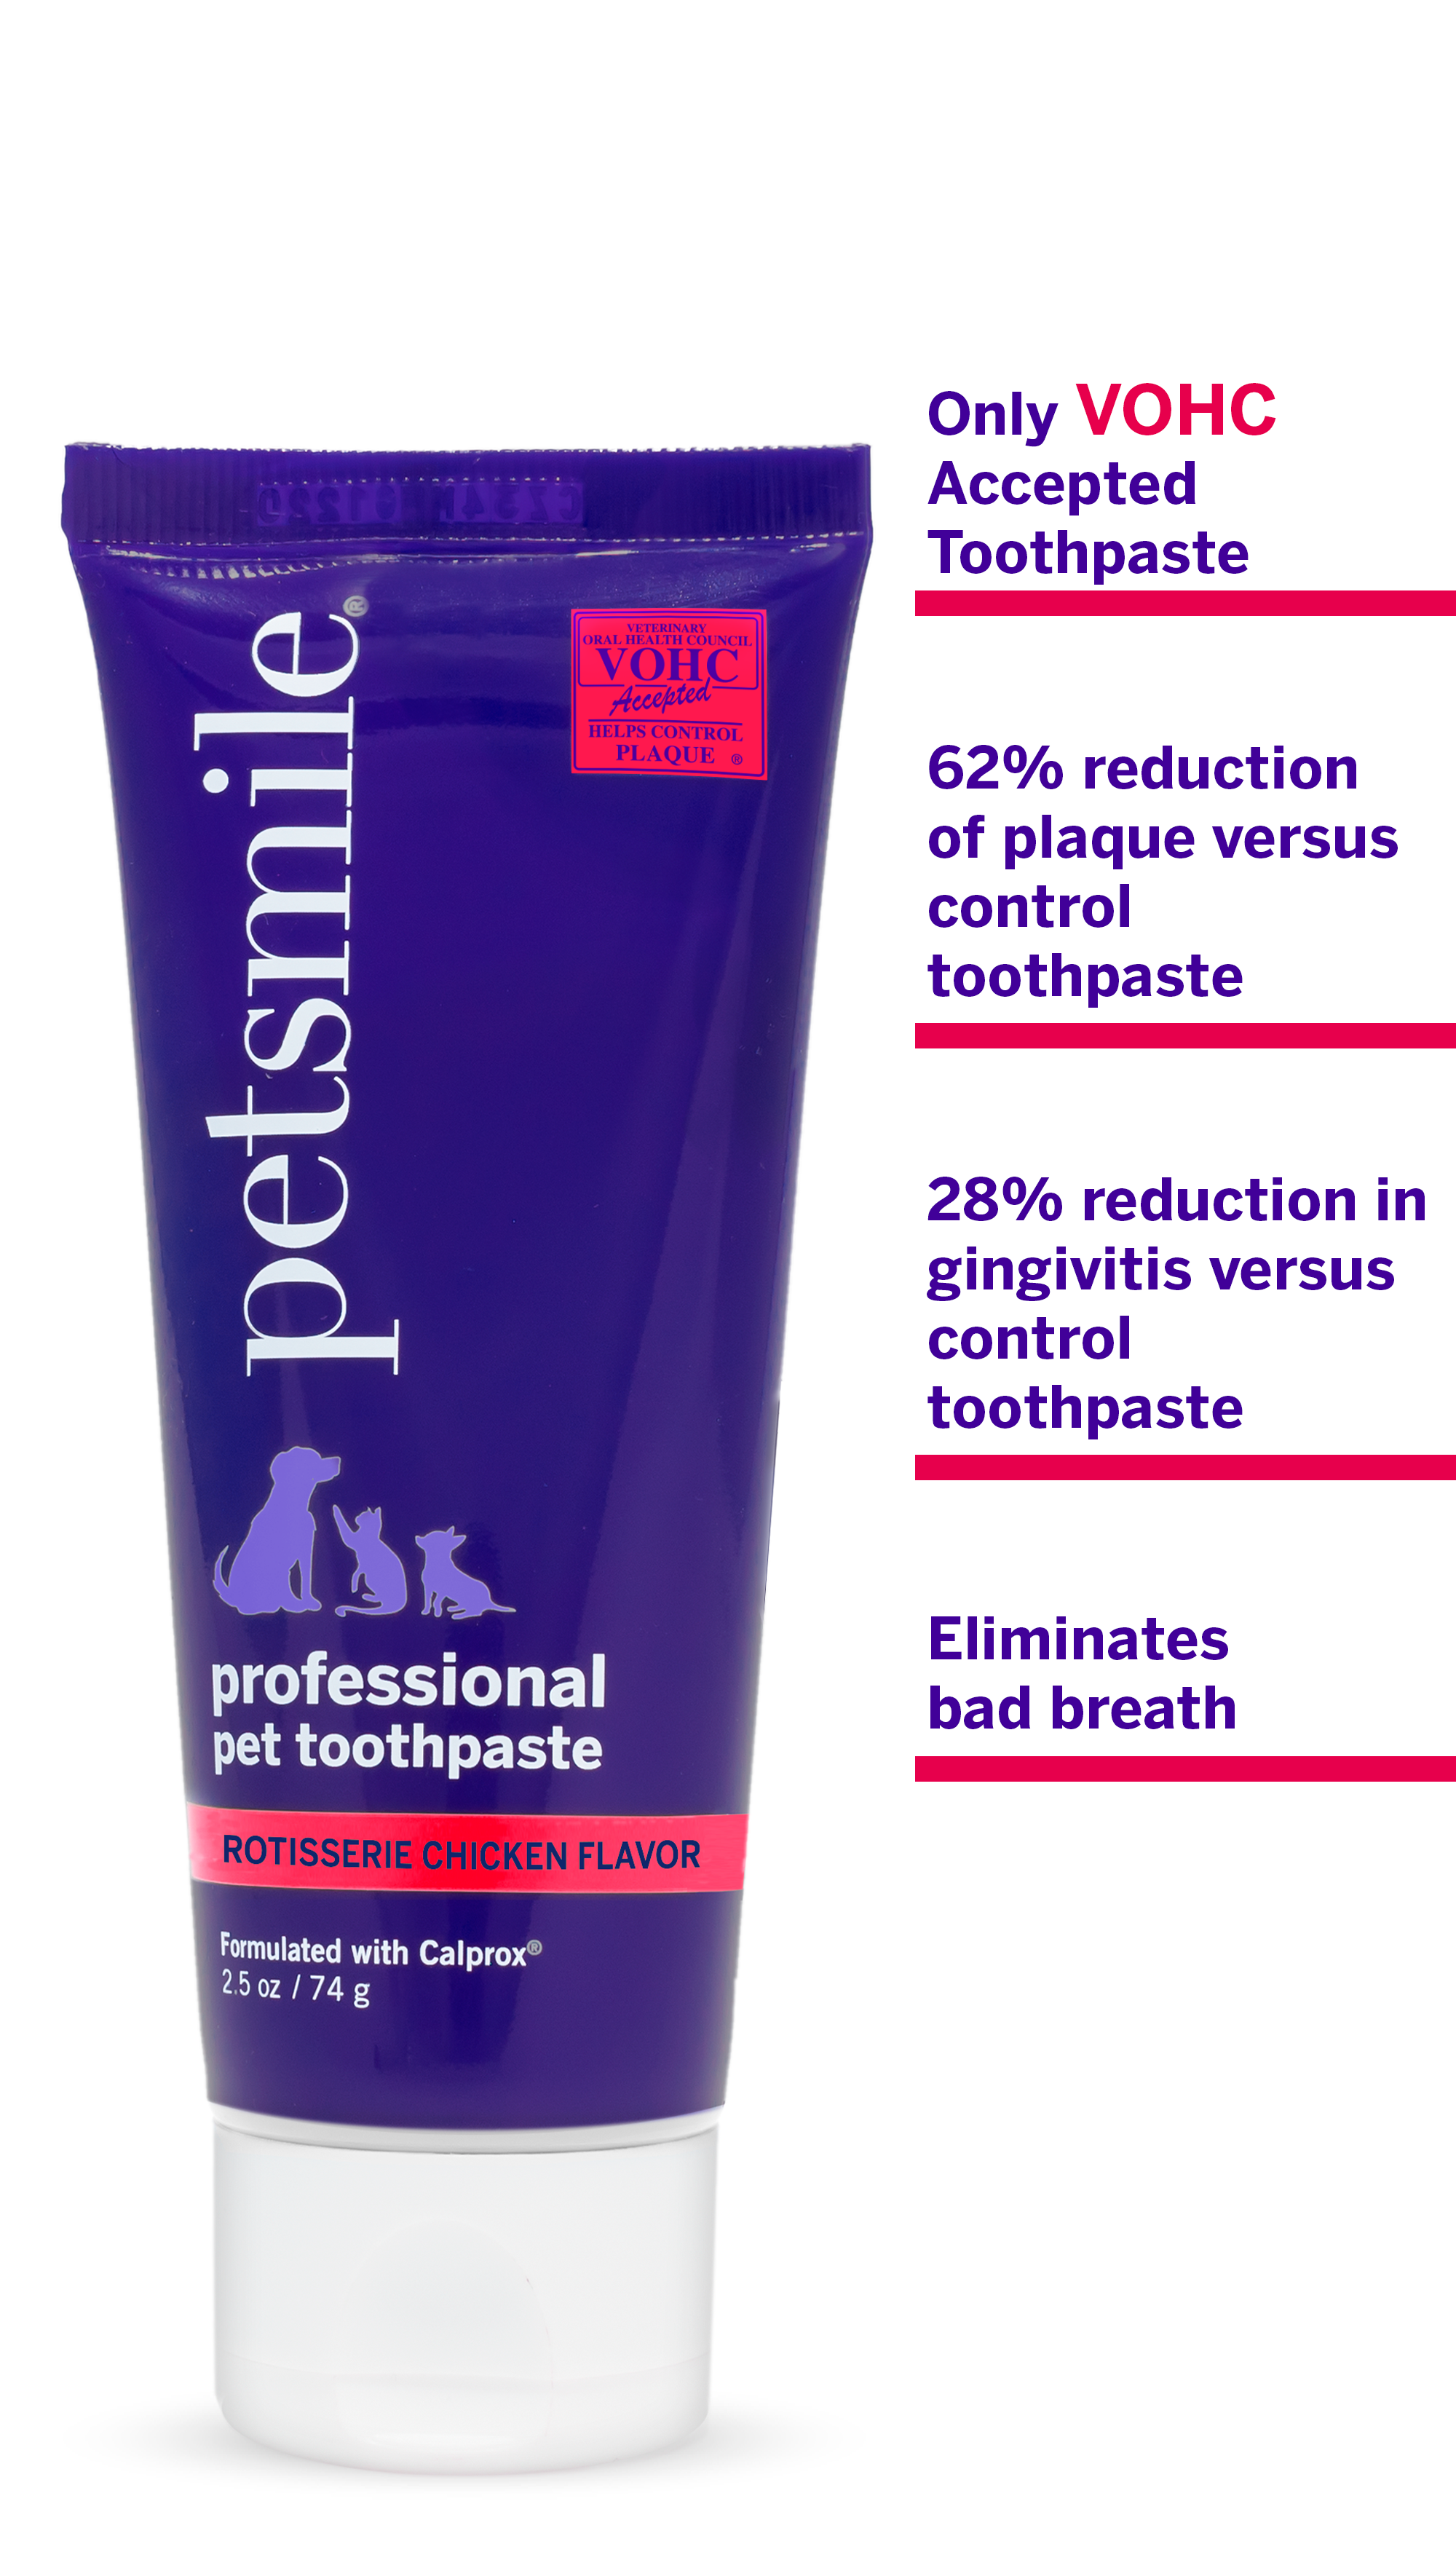 2.5 OZ of small dog toothapste , petsmile professional dog toothpaste with chicken flavor , Small tube of petsmile professional toothpaste for all dogs , 62% greater in plaque reduction, 28% greater in gingivitis reduction , Clinically tested, superior results , Small tube, big results